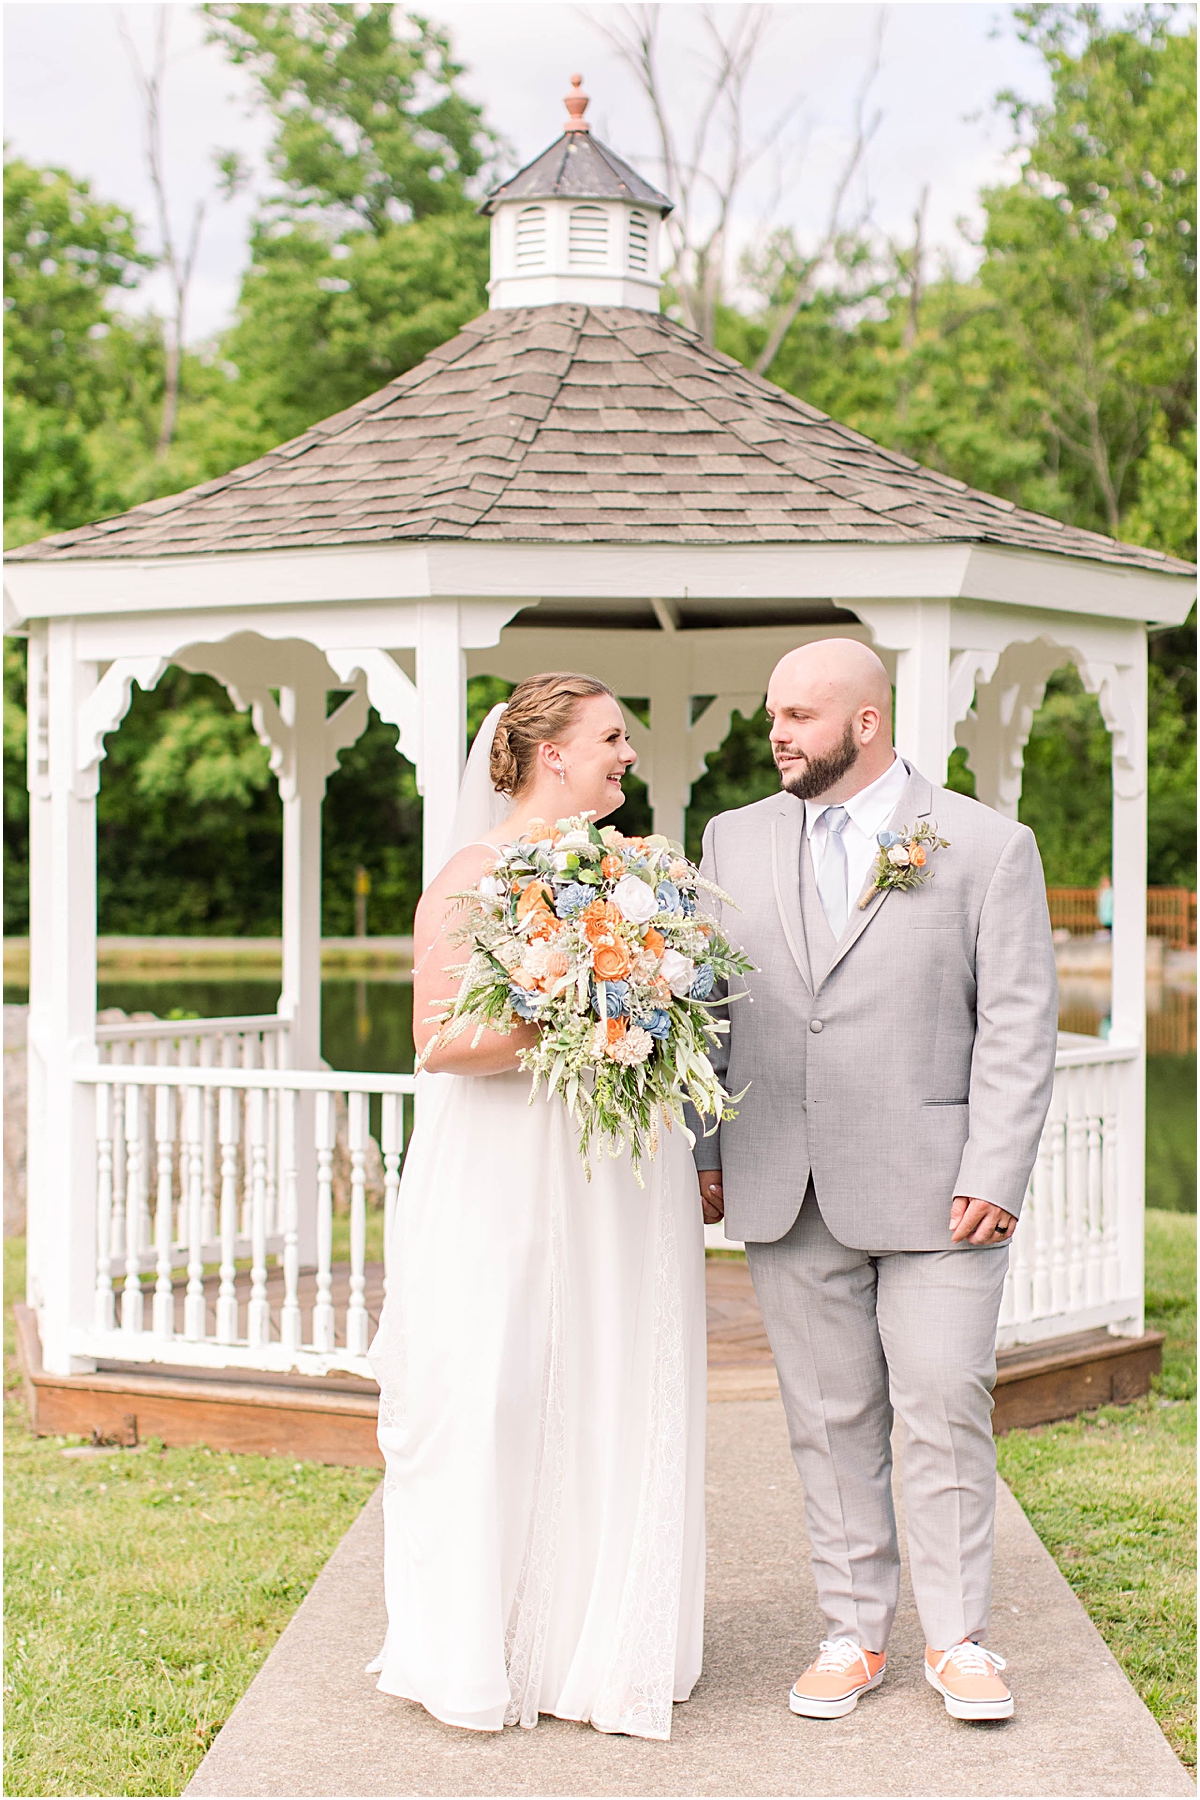 Anneliese and Alec smiling at each other while they stand in front of a gazebo on their wedding day.